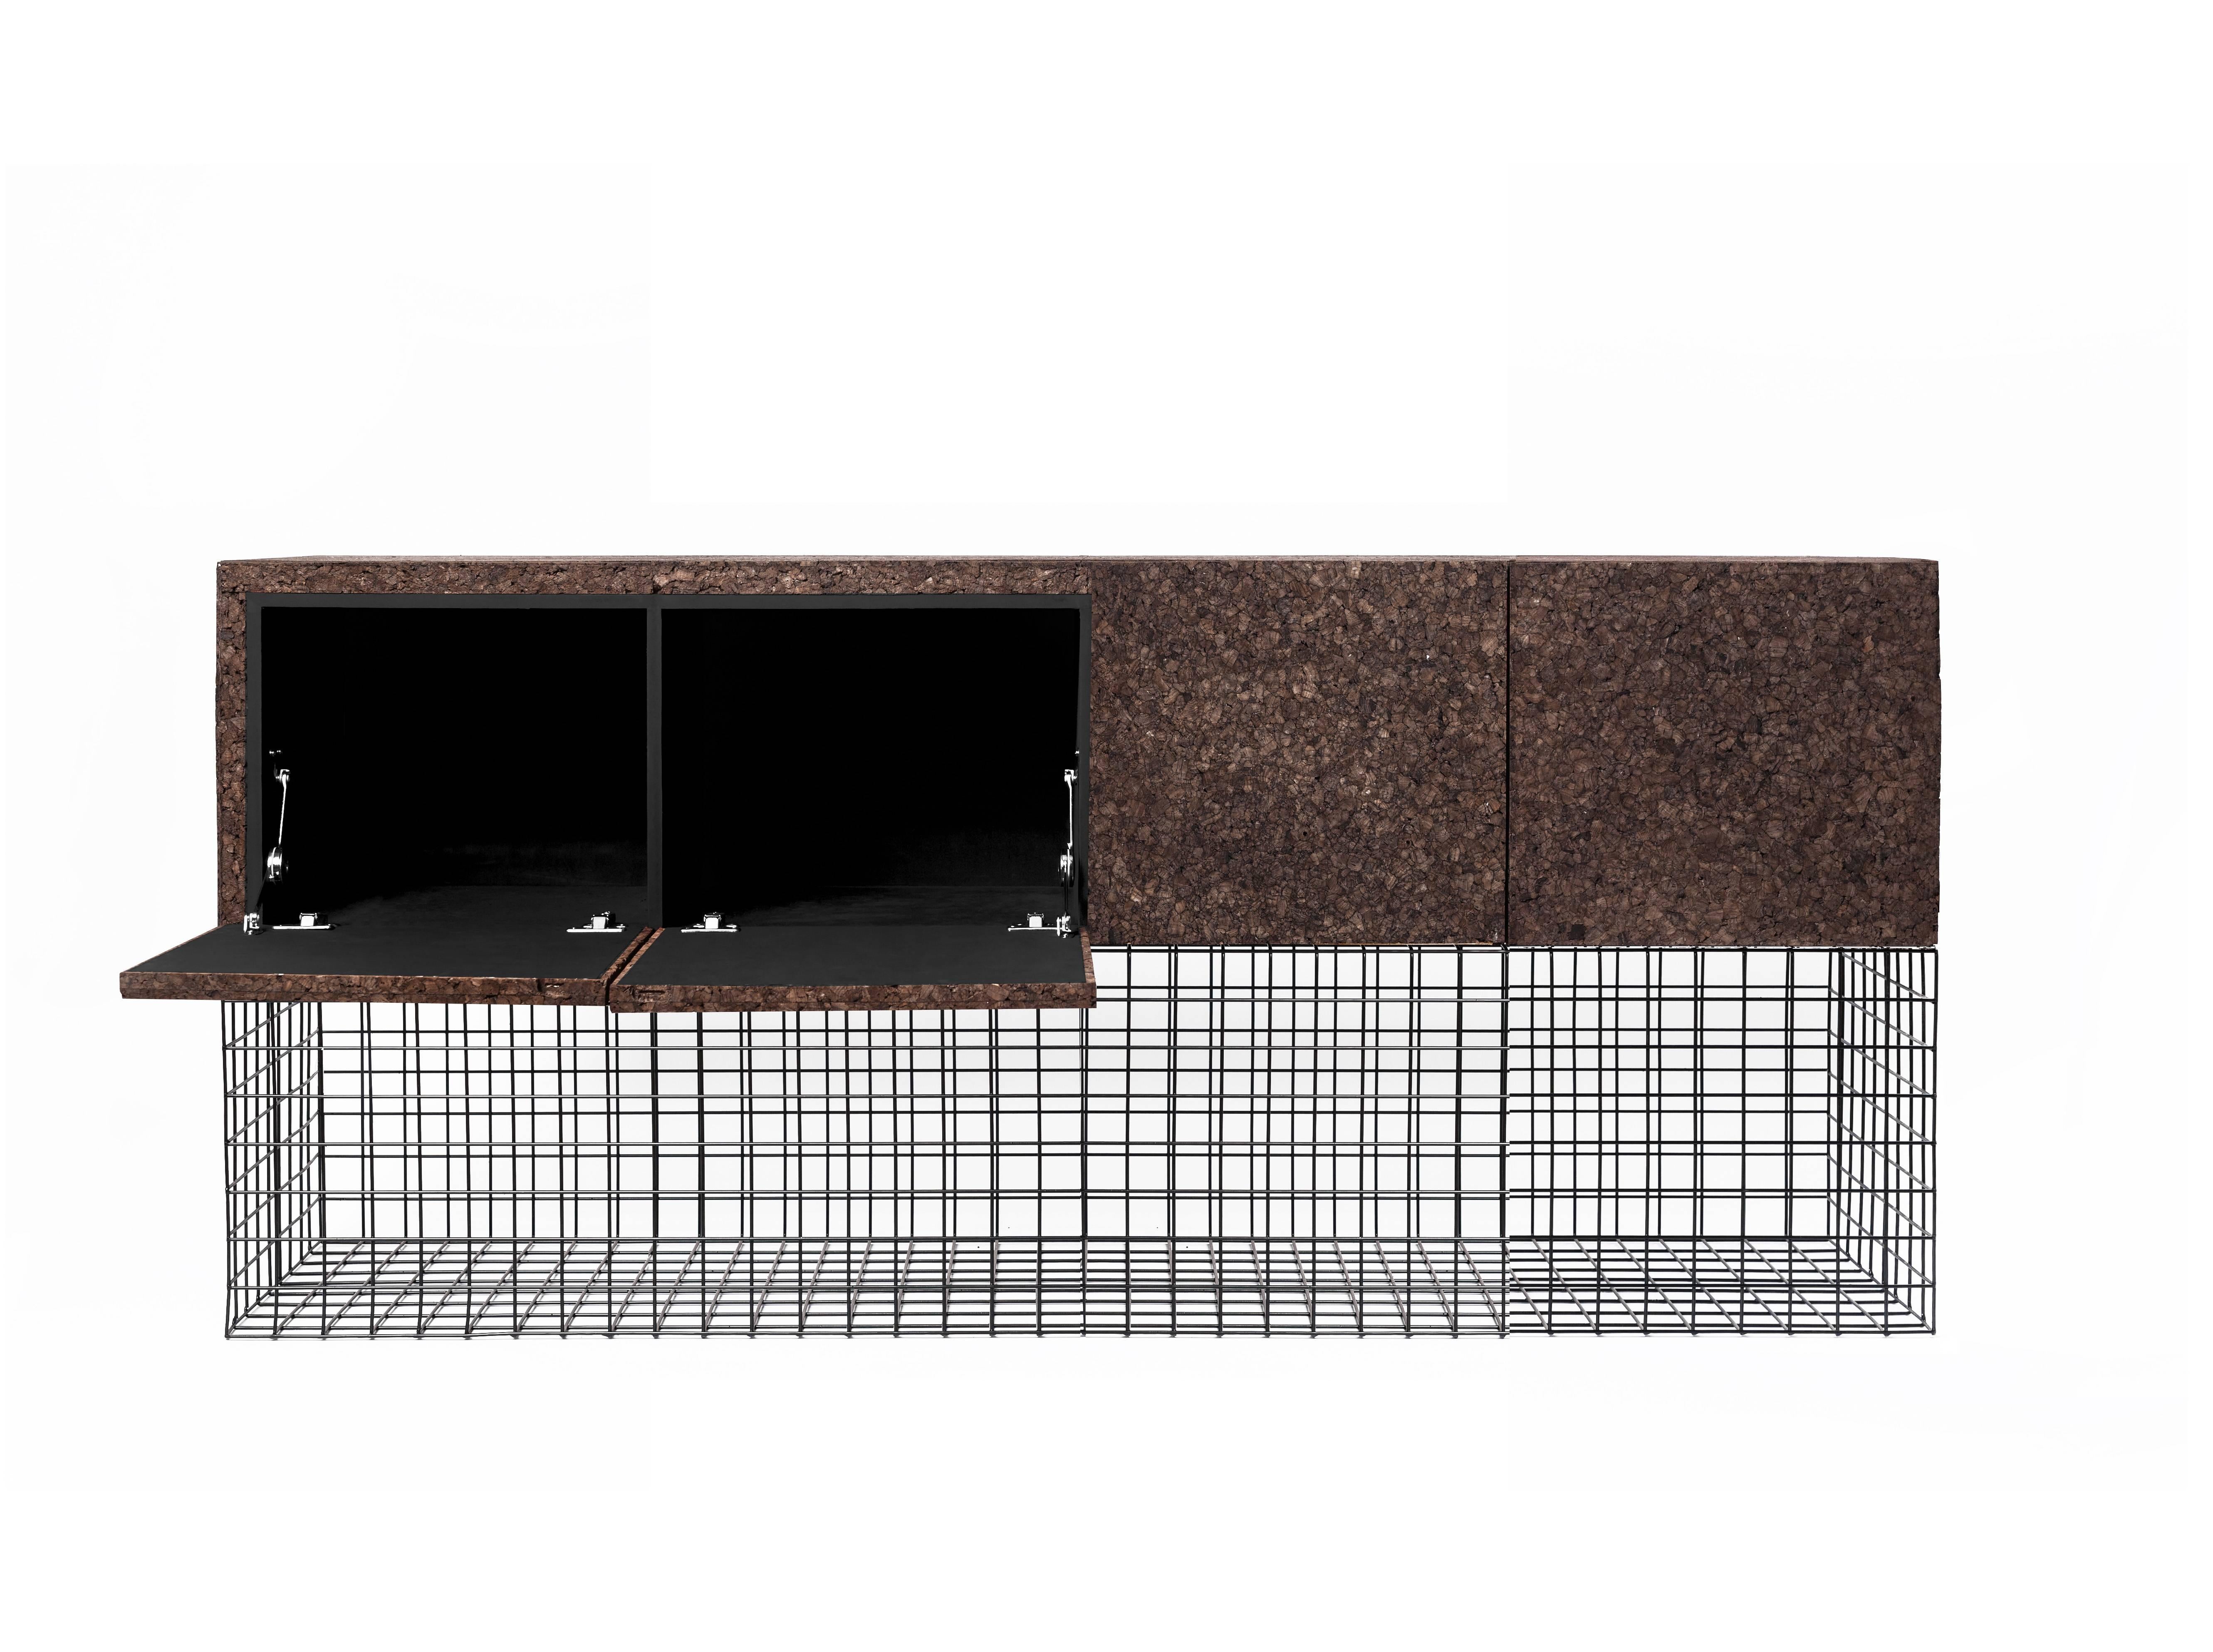 Grove sideboard / console or buffet 180 cm with four doors for storage in toasted cork and metal / design award winner

This collection also won the Wallpaper Award 2018 as best product. This furniture is very geometric, minimalist, contemporary